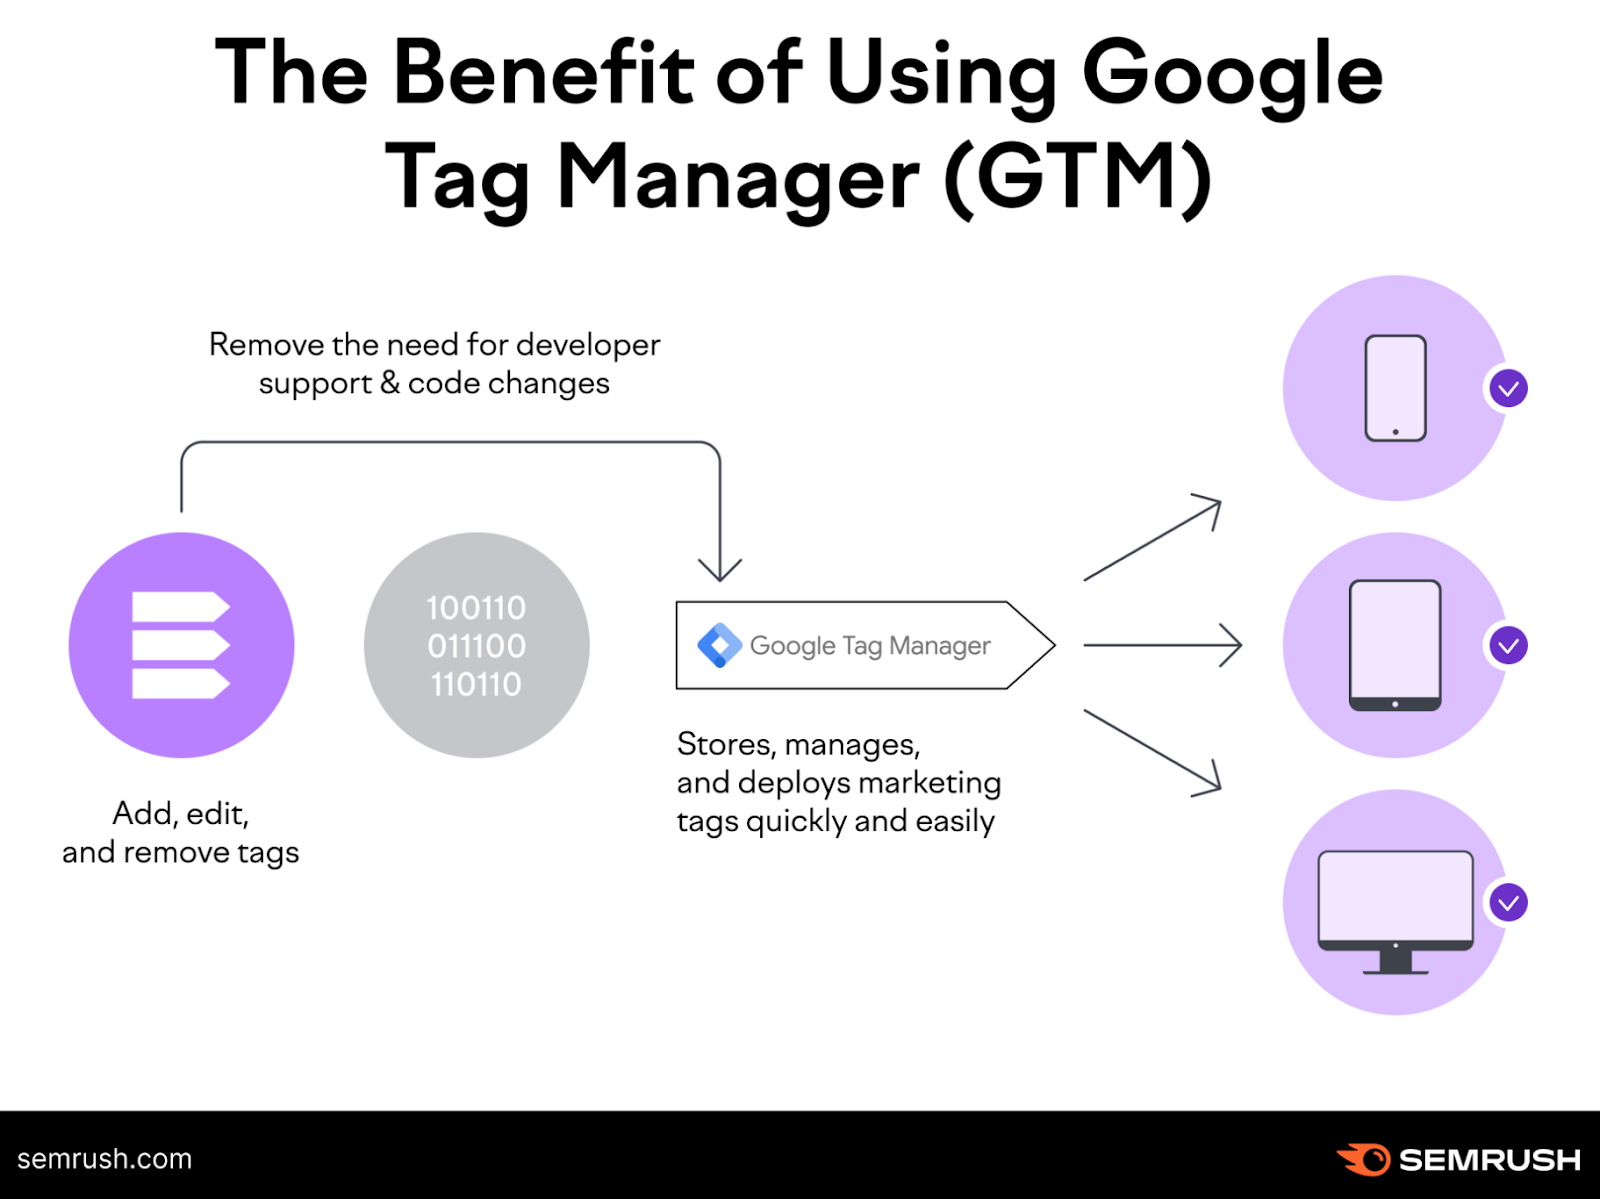 Semrush's infographic showing the benefits of using Google Tag Manager